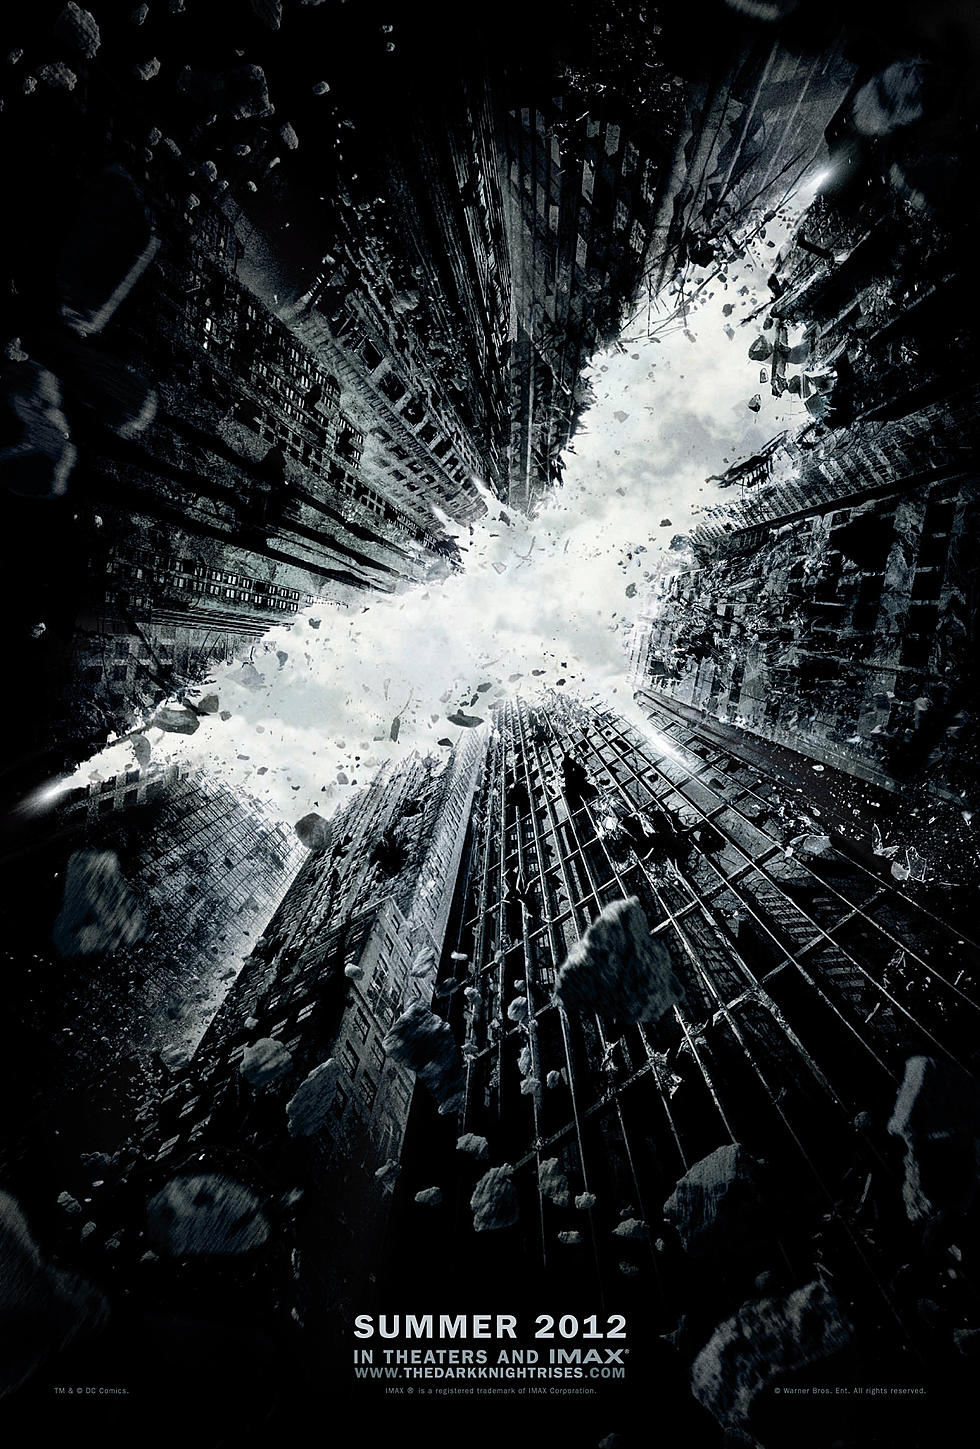 The First Trailer for ‘The Dark Knight Rises’ [VIDEO]